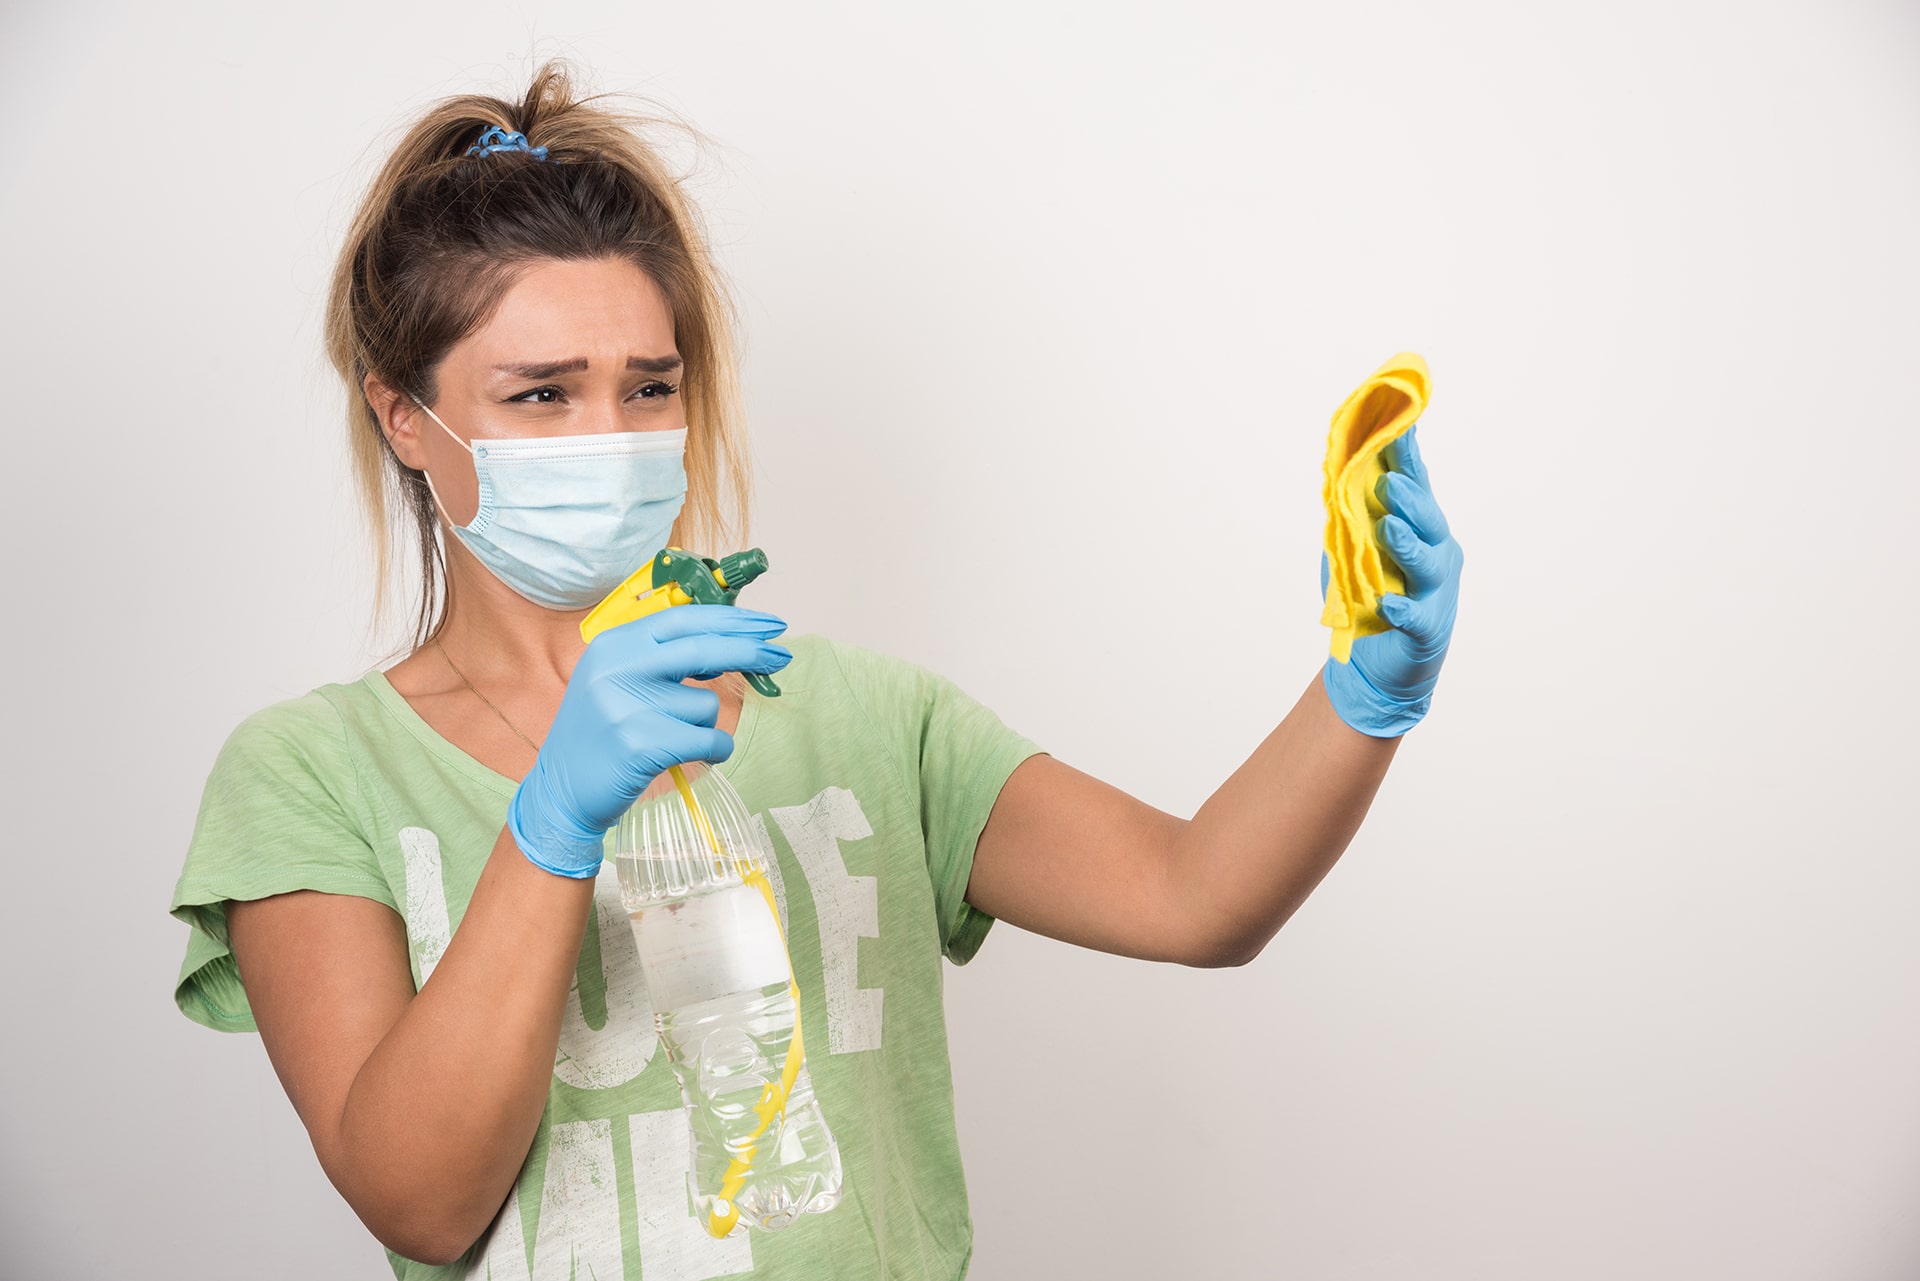 Cleaning to prevent diseases